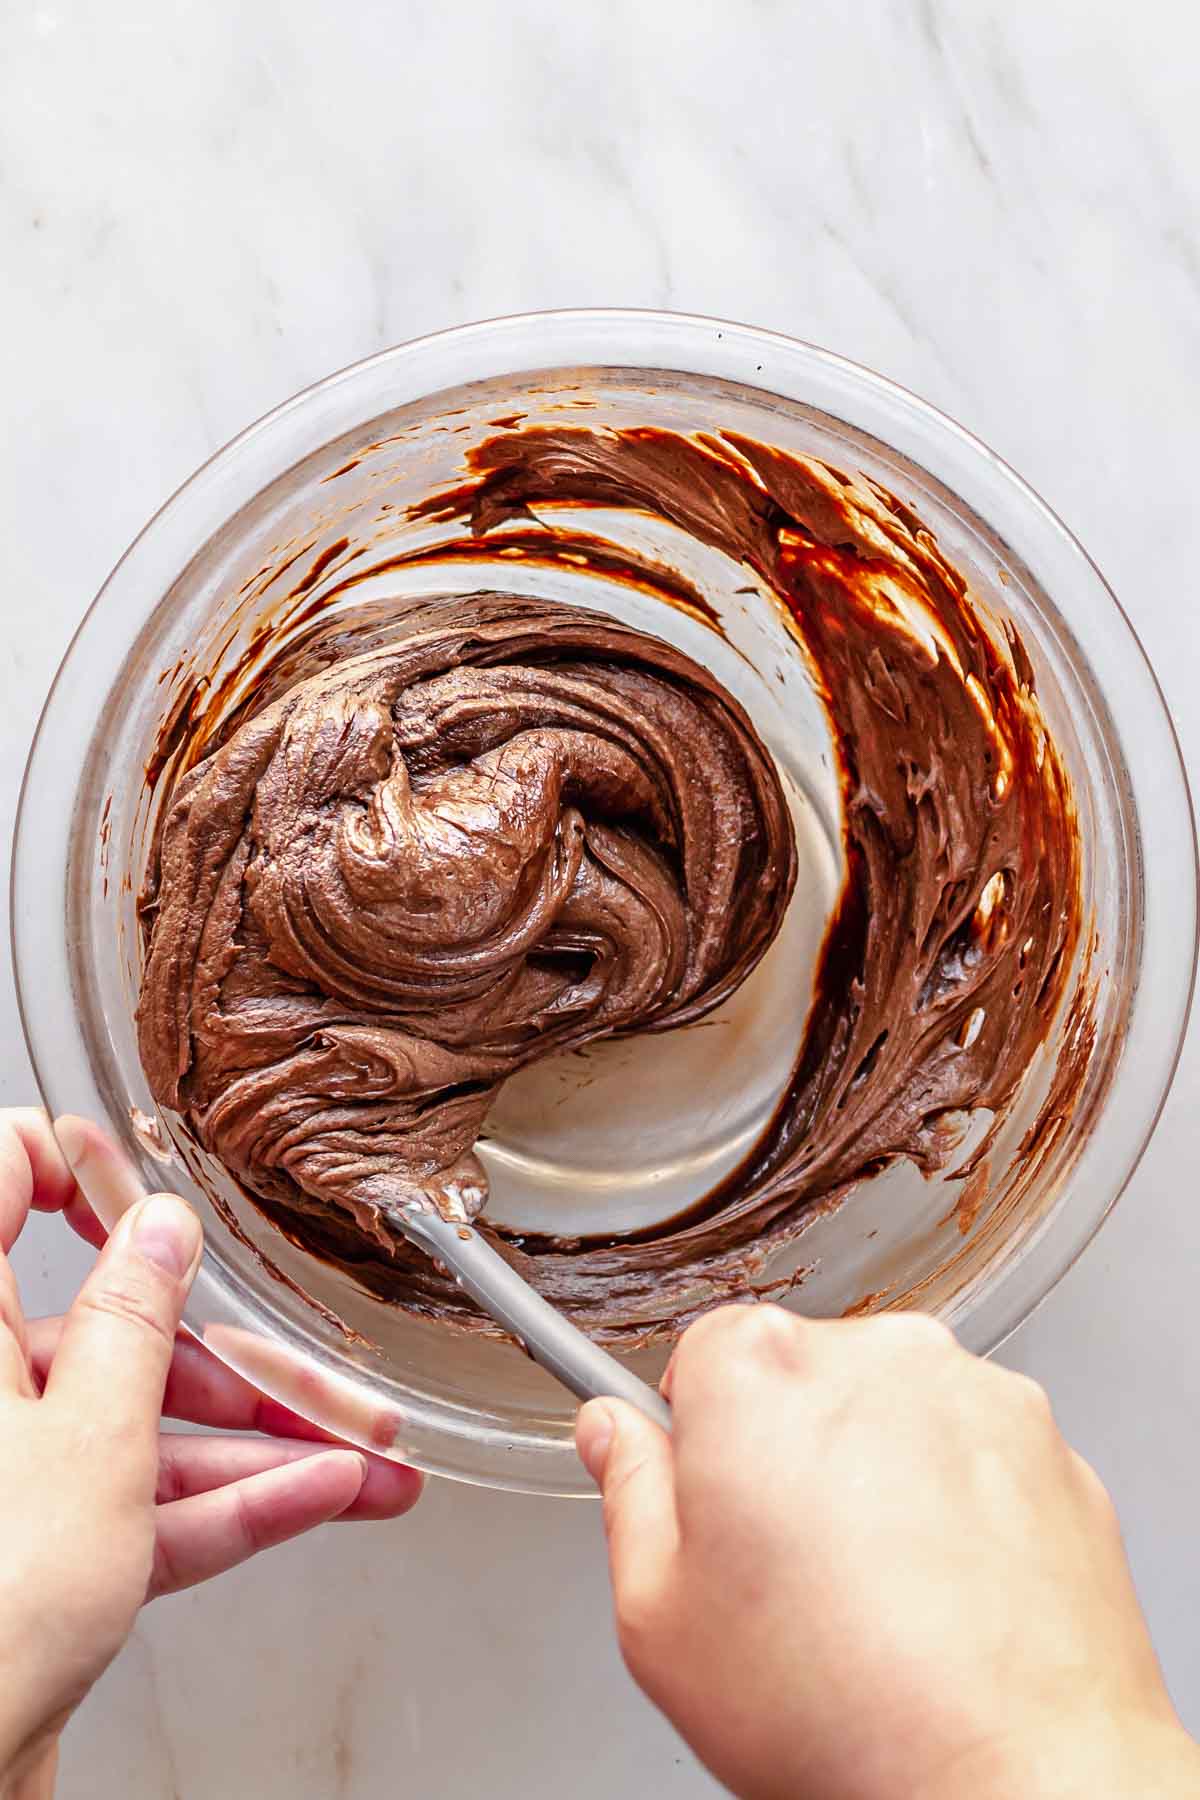 A hand mixes chocolate into cream cheese frosting.